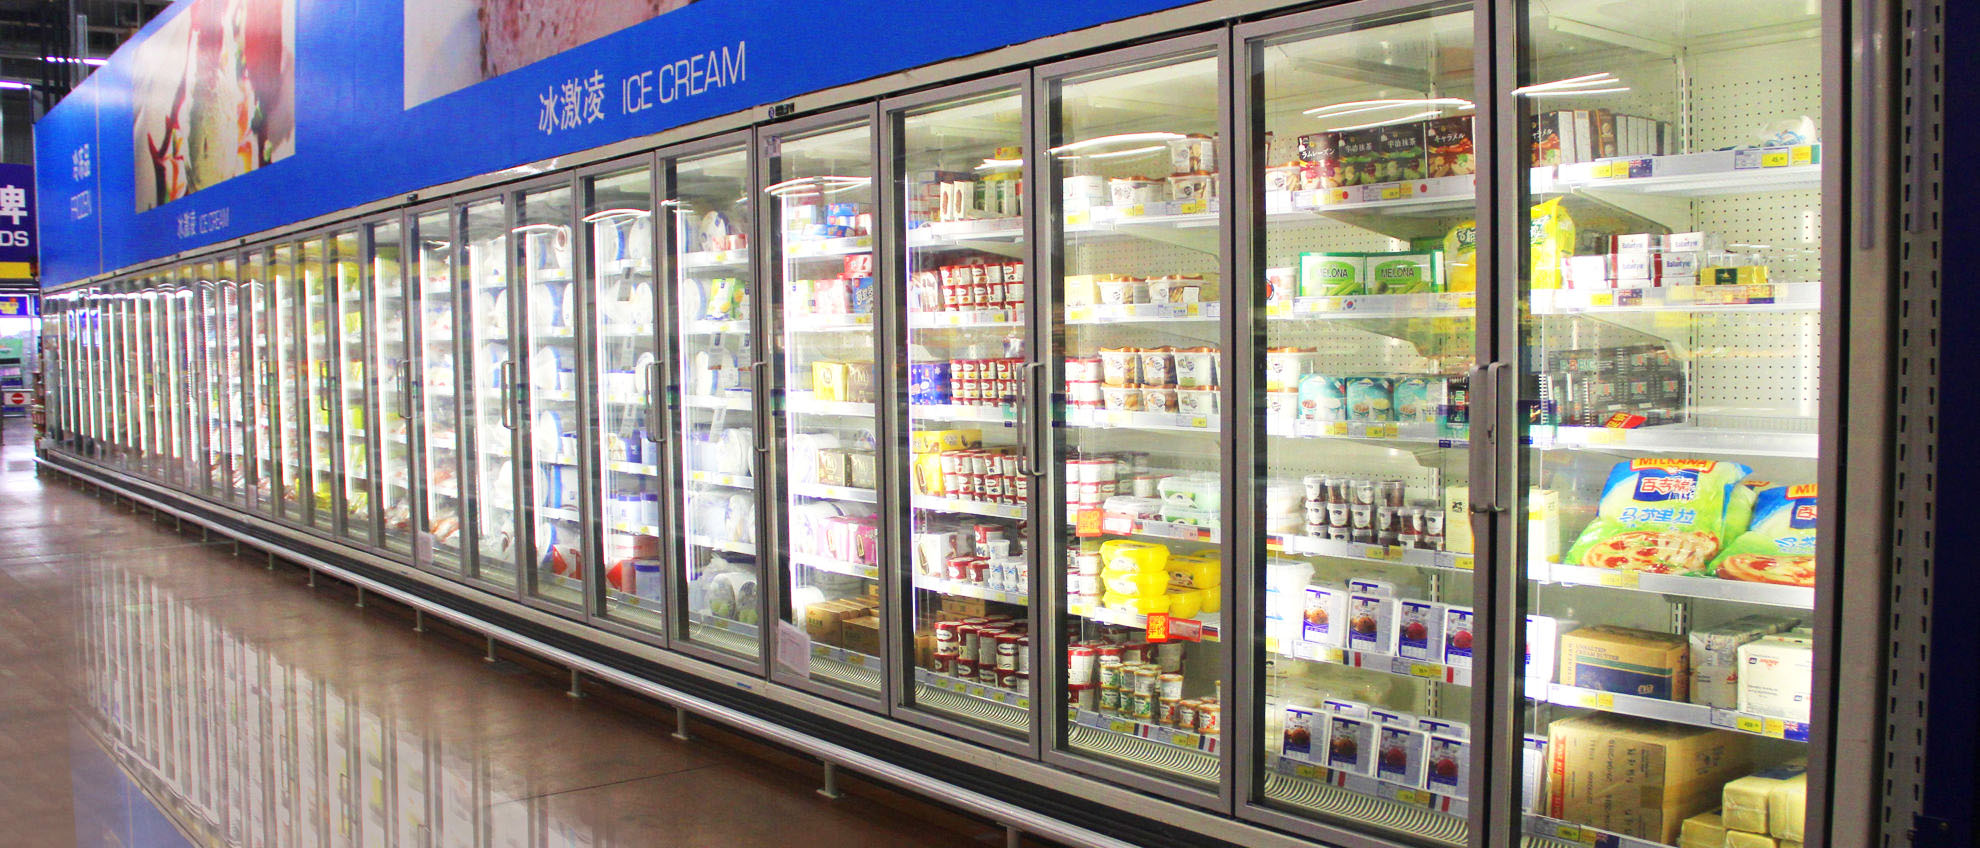 Covid-19 Outbreak Generates Growth Opportunities in Commercial Refrigerator Industries